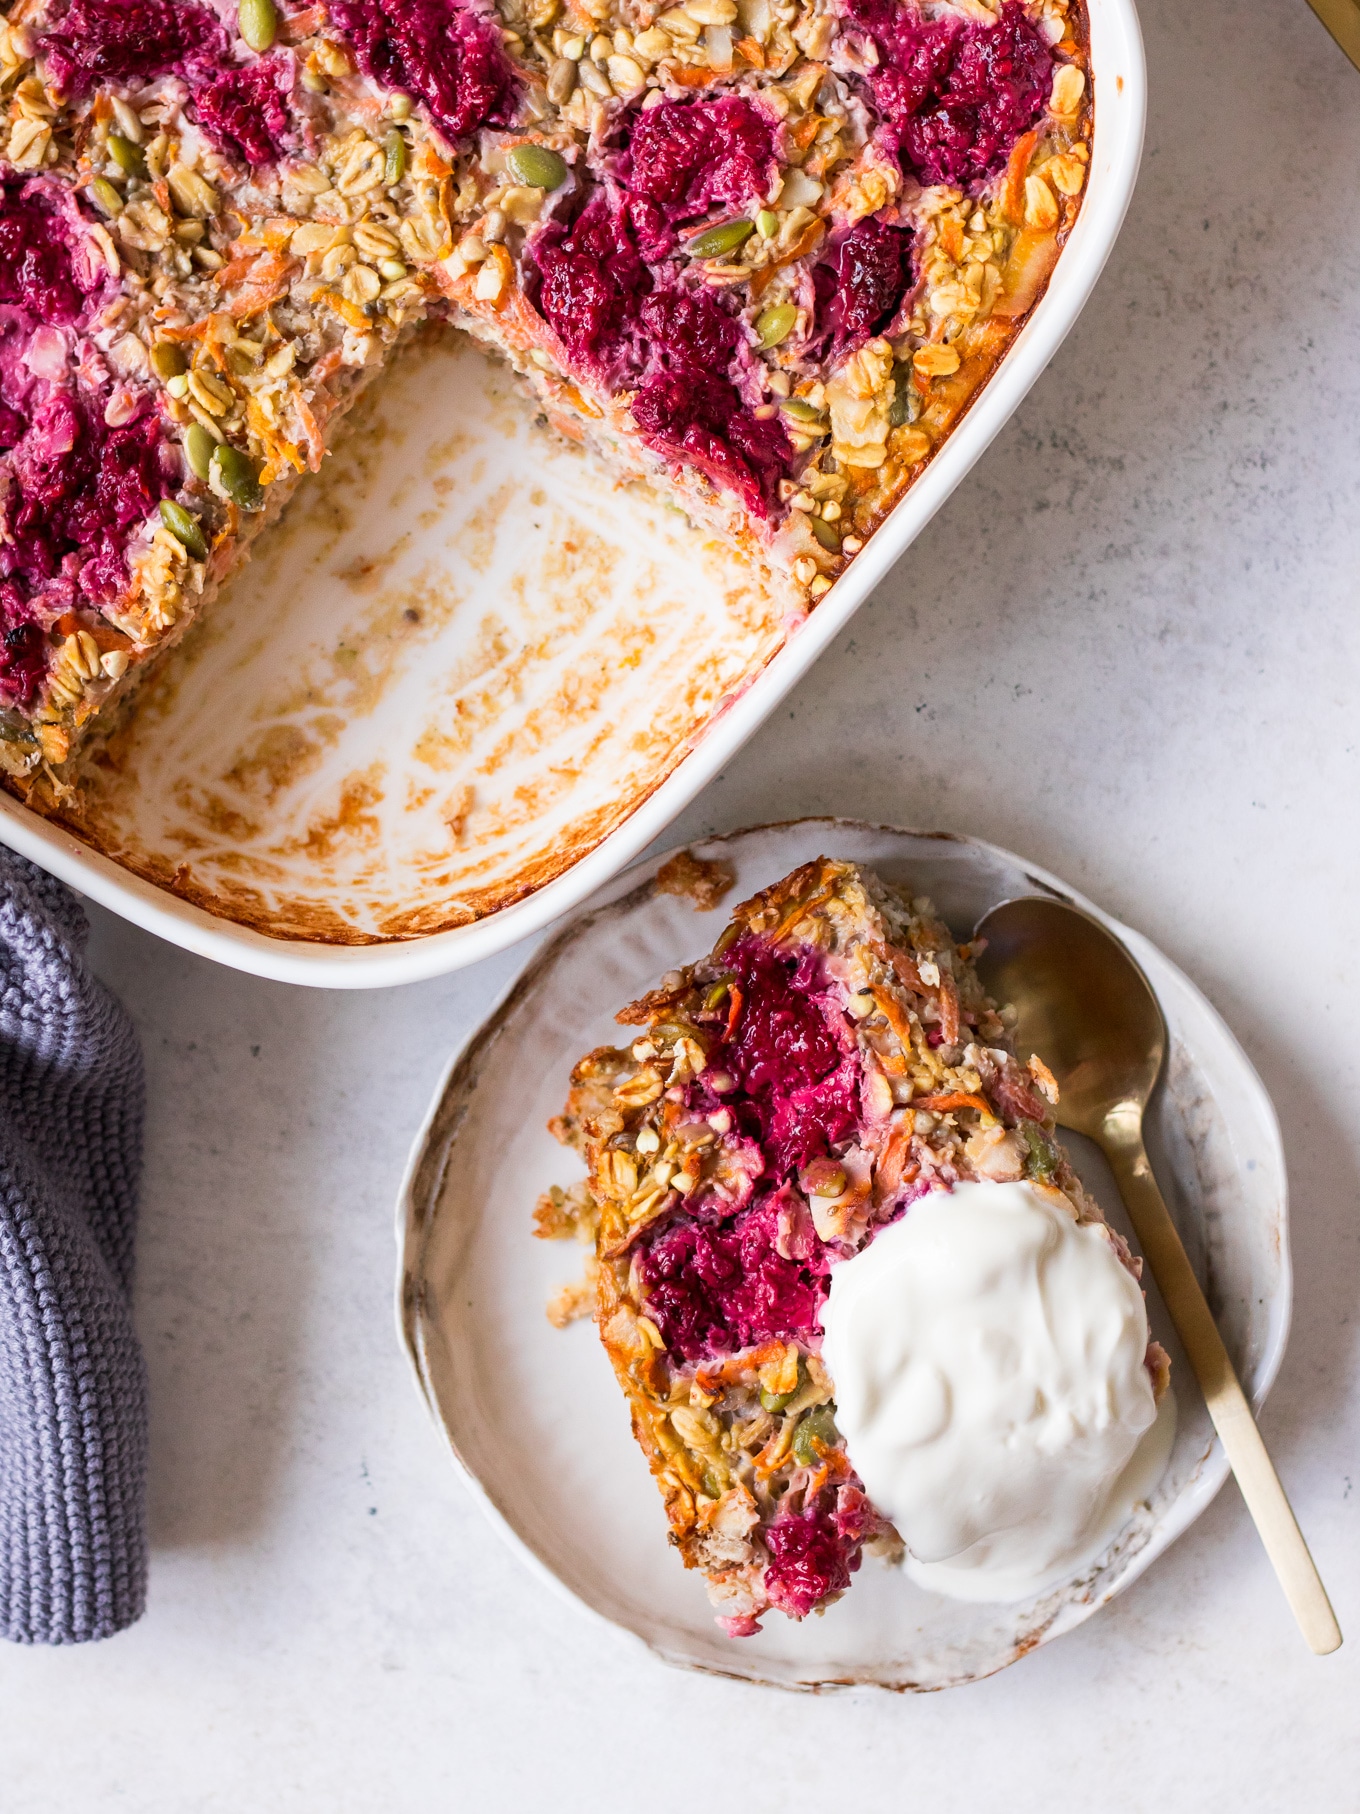 Serving of carrot raspberry baked oats on side plate